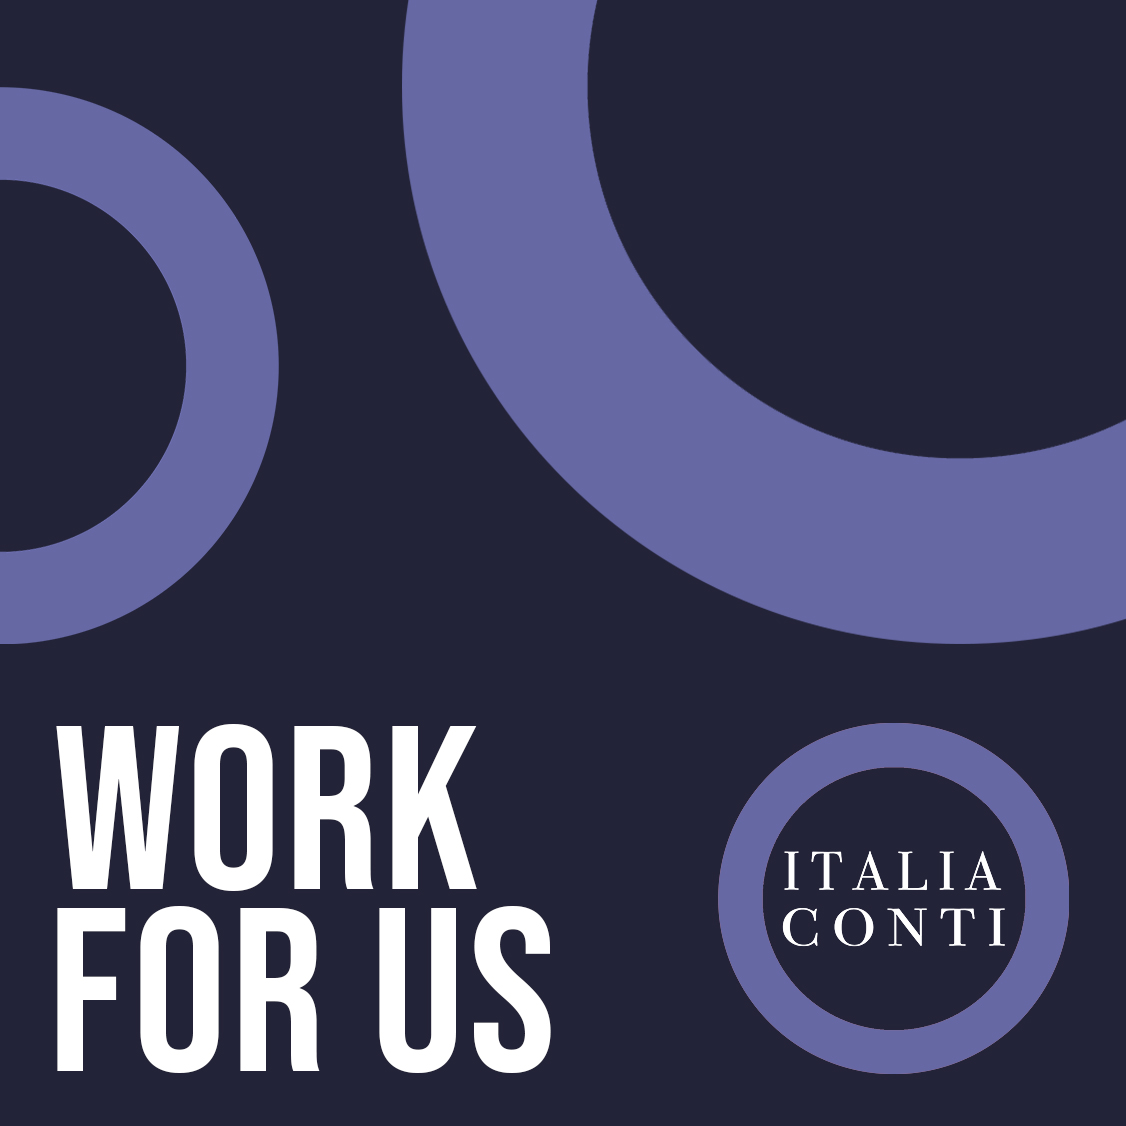 We are currently inviting applications from candidates to apply for the position of Receptionist at Italia Conti Full-time inc Saturdays during term-time. Permanent Closing: 02.01.24. italiaconti.com/work-for-us